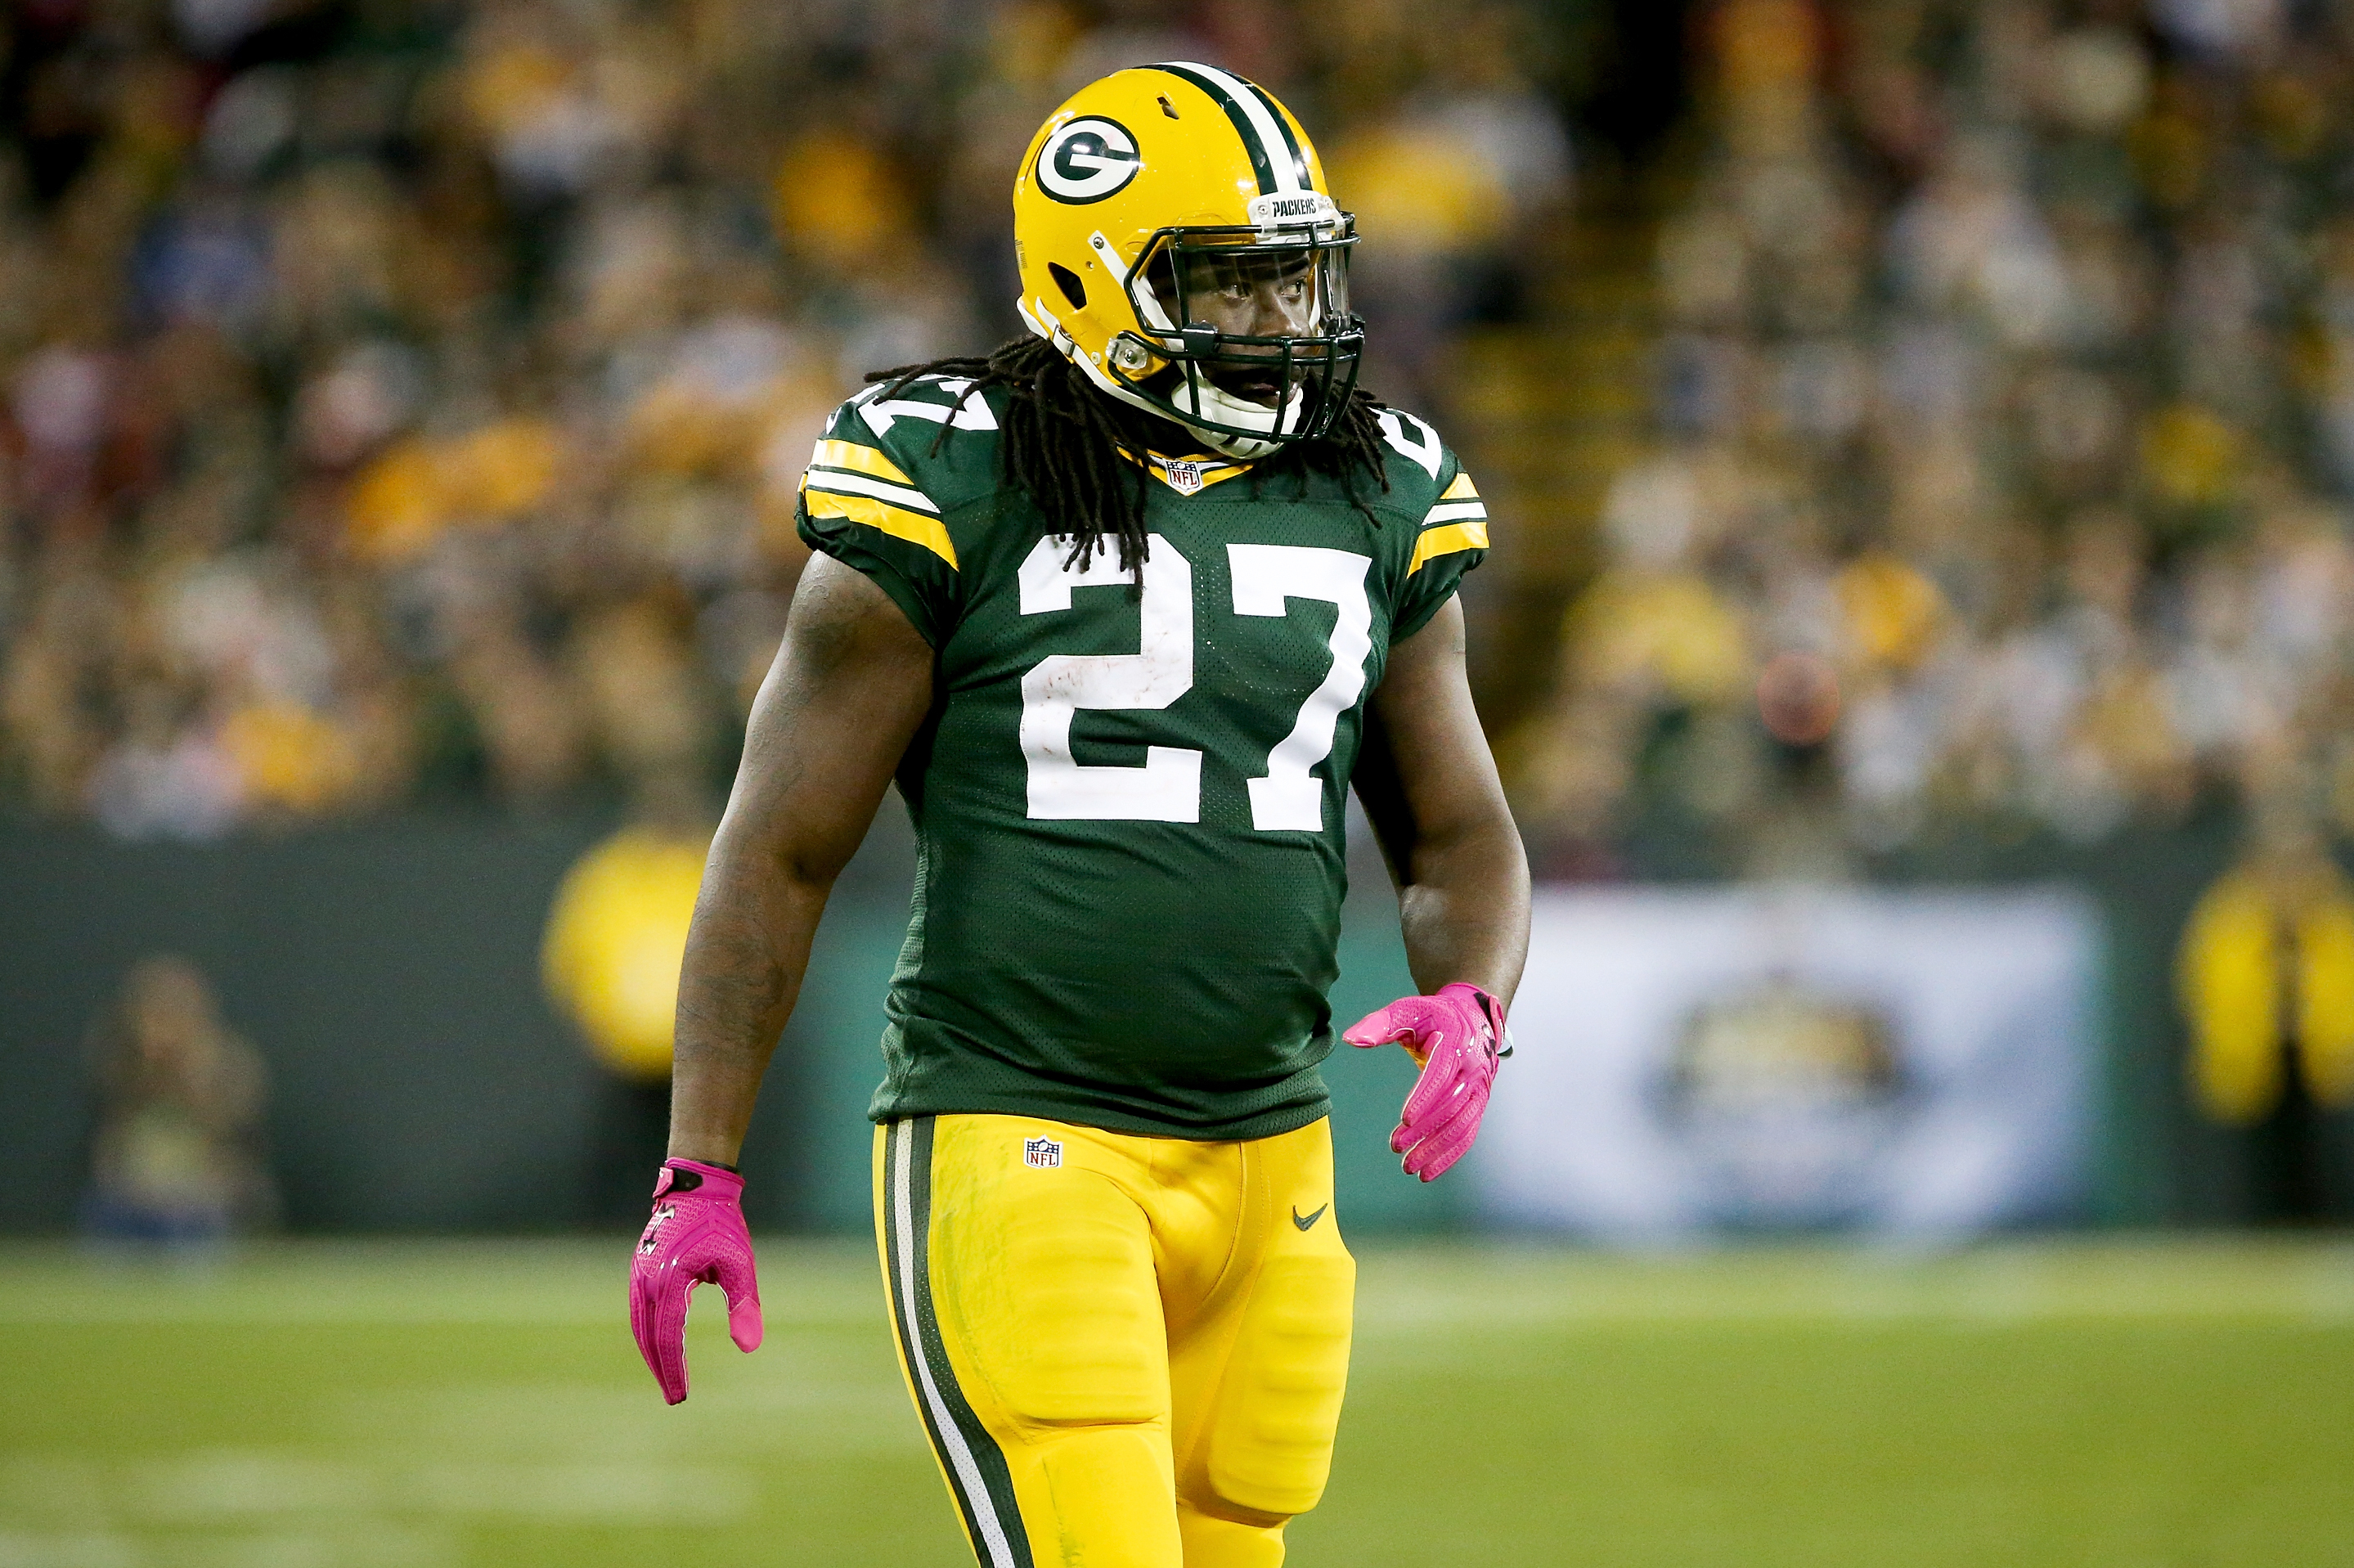 Can Eddie Lacy Be the NFL's Next Legendary Power Back?